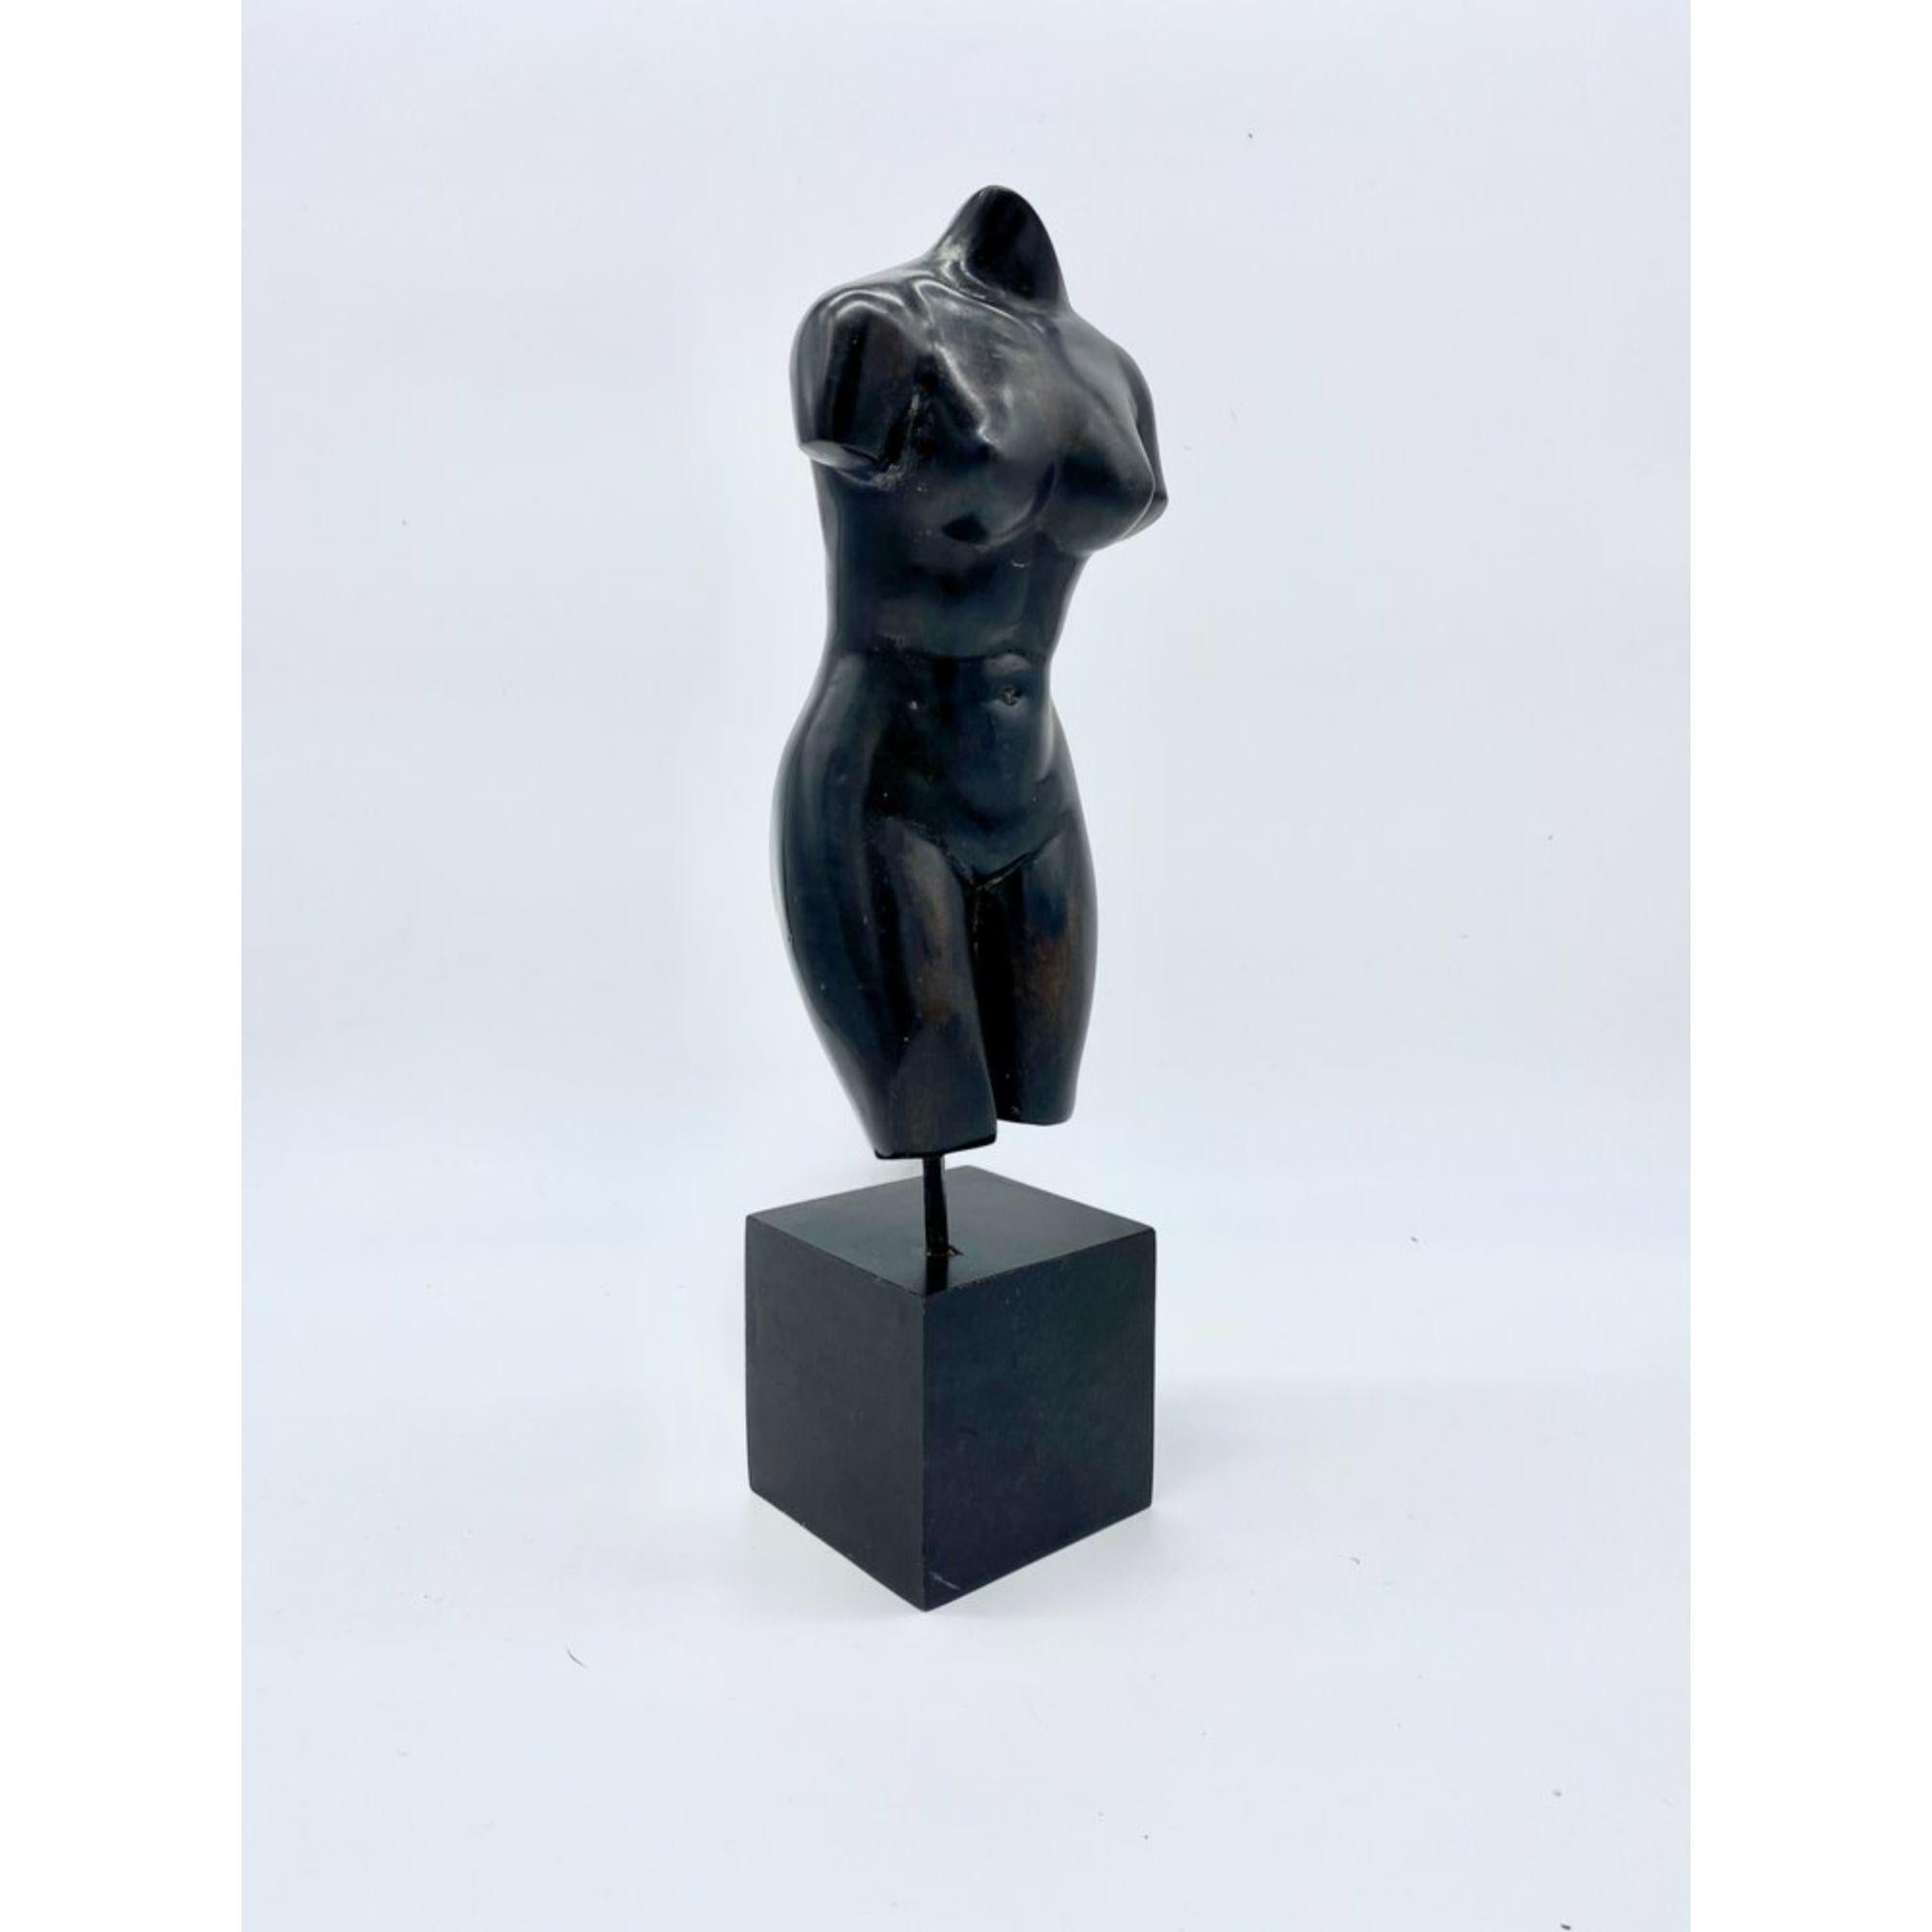 Mid-century cast stone sculpture of a female torso on a wood cube plinth.

Additional Information:
Materials:Stone, Wood
Color: Black
Style: Art Deco, Hollywood Regency, Neoclassical
Art Sublect: Figure
Period: 1960s
Item Type: Vintage, Antique or